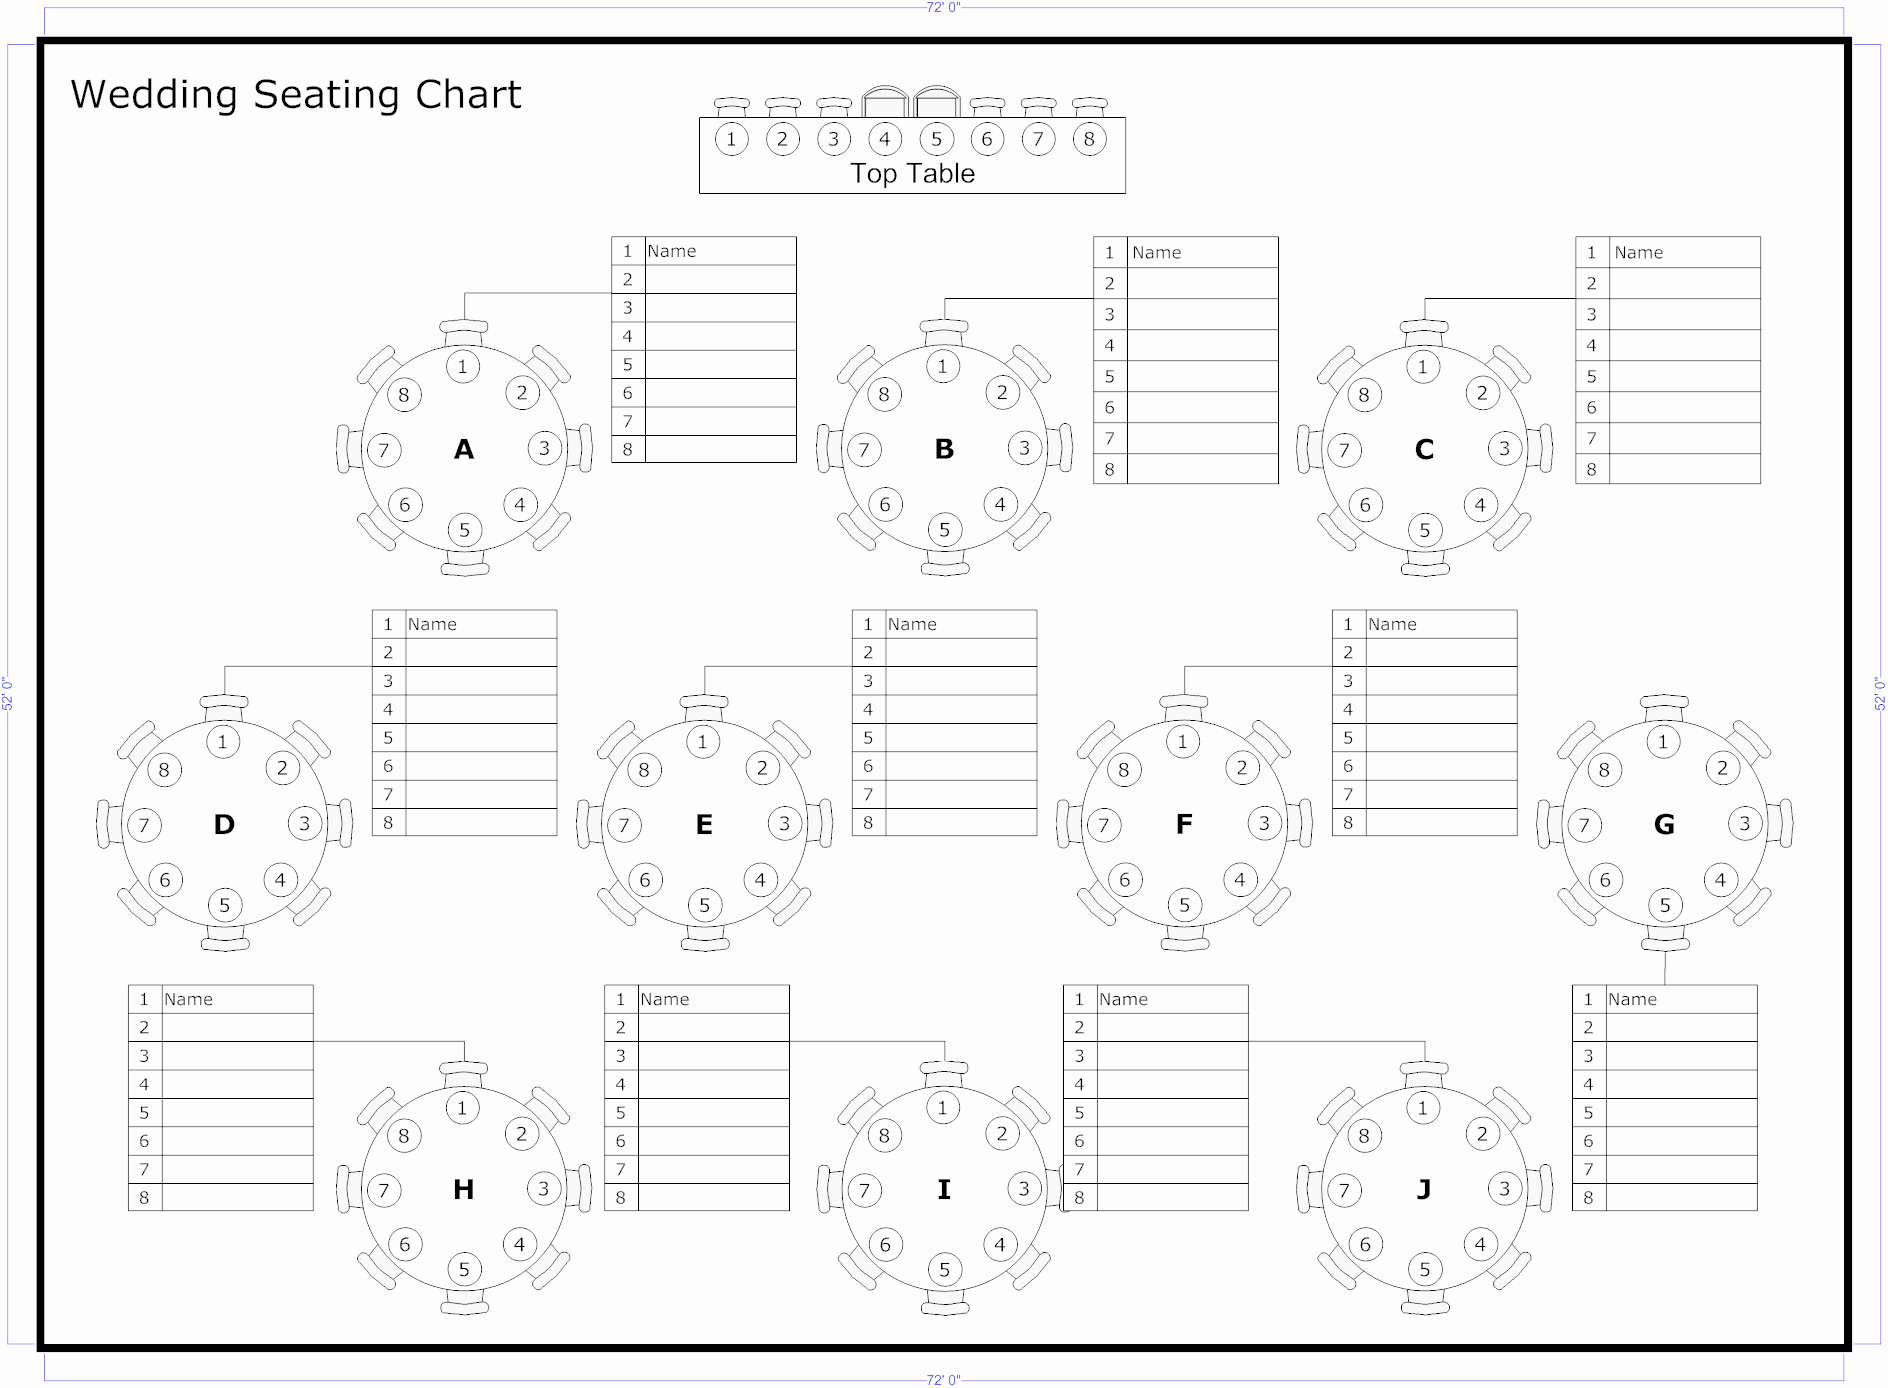 Wedding Table Seating Chart Awesome Seating Chart Make A Seating Chart Seating Chart Templates